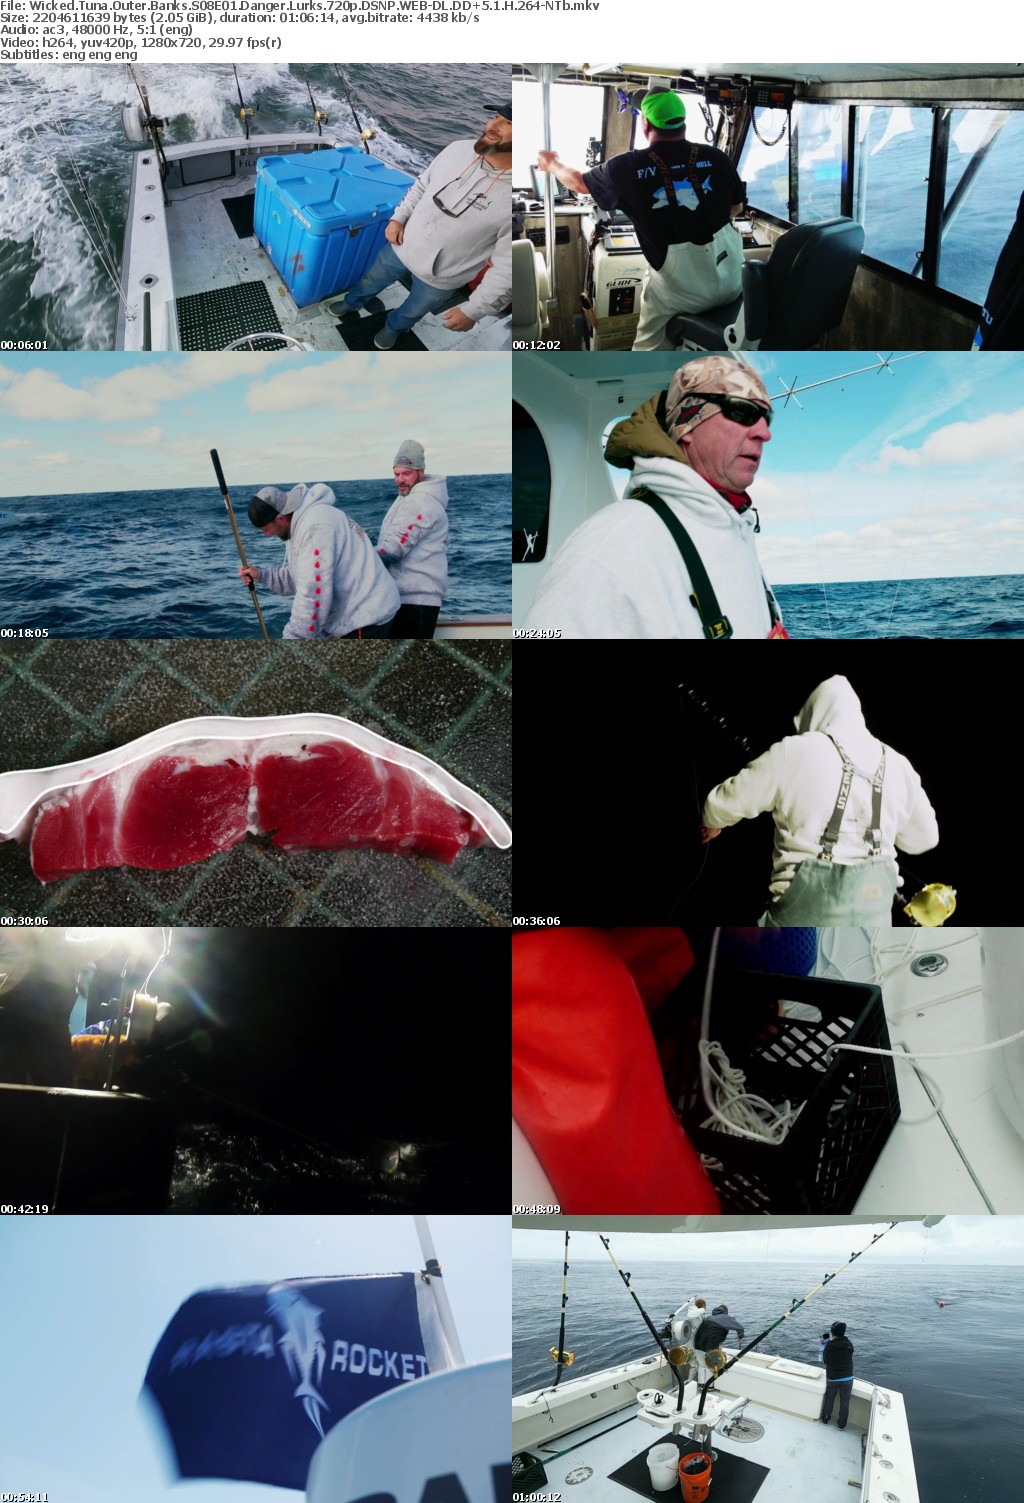 Wicked Tuna Outer Banks S08E01 Danger Lurks REPACK 720p DSNP WEBRip DDP5 1 x264-NTb